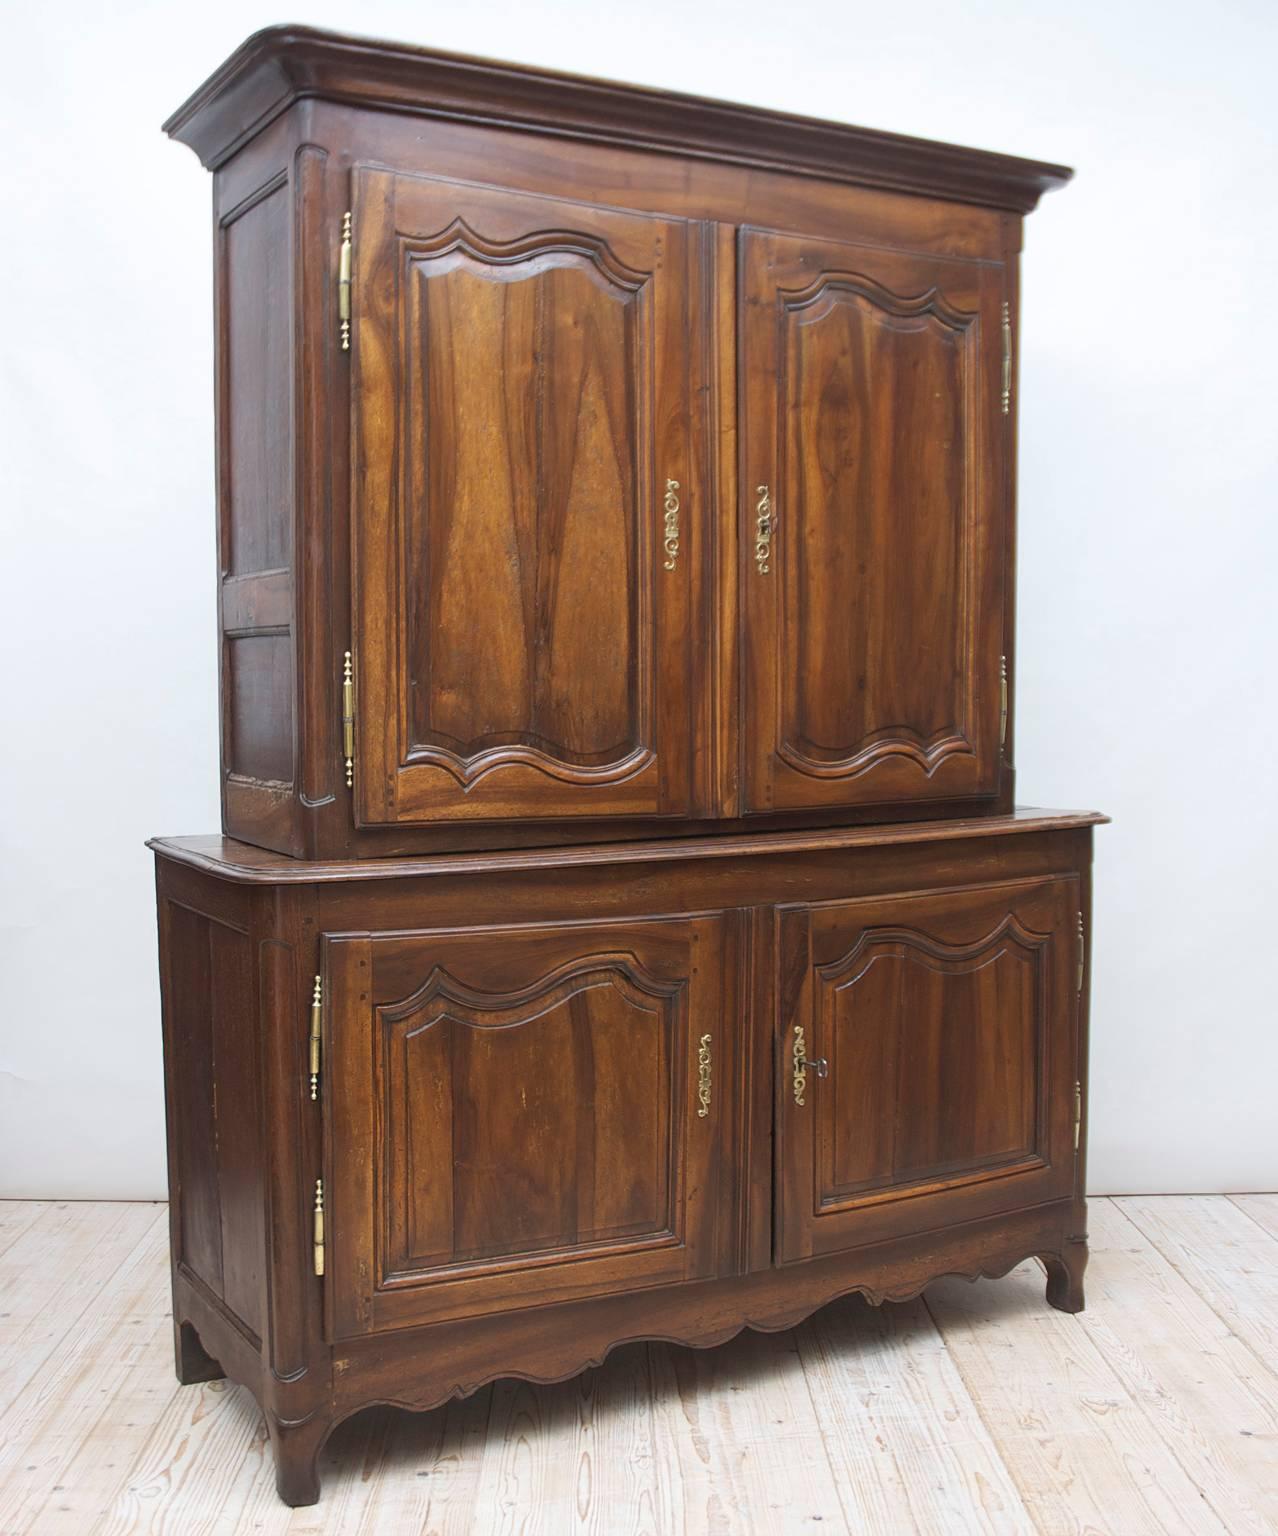 An 18th century buffet a deux corps in walnut with a cabinet resting above another cabinet and terminating on short carved cabriole legs with carved apron. Features original brass hardware, with working locks and key, France, circa late 1700s.
Note: